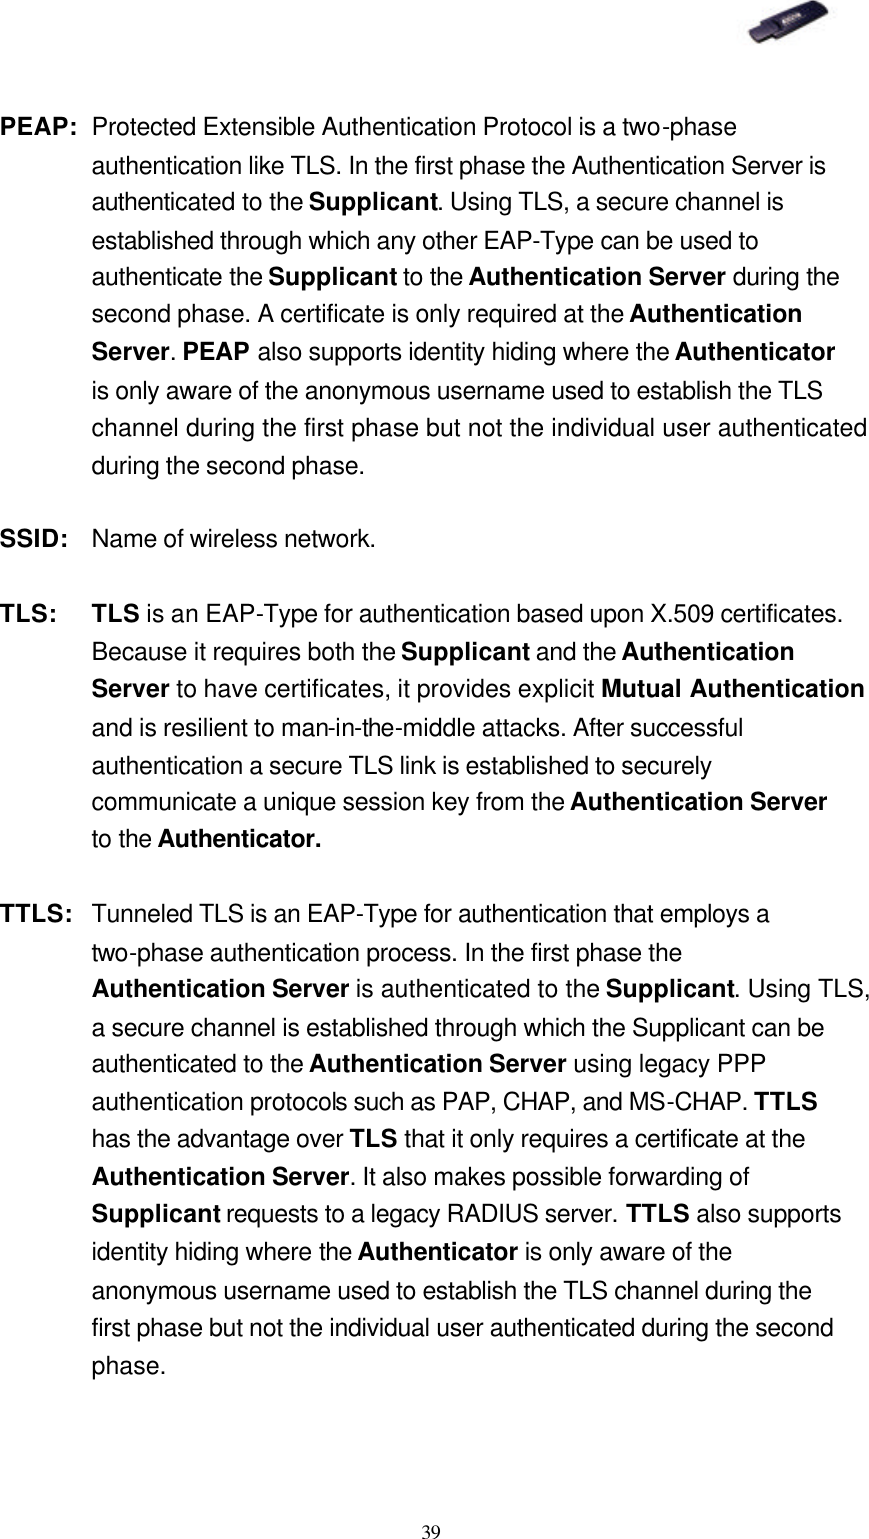   39 PEAP: Protected Extensible Authentication Protocol is a two-phase authentication like TLS. In the first phase the Authentication Server is authenticated to the Supplicant. Using TLS, a secure channel is established through which any other EAP-Type can be used to authenticate the Supplicant to the Authentication Server during the second phase. A certificate is only required at the Authentication Server. PEAP also supports identity hiding where the Authenticator is only aware of the anonymous username used to establish the TLS channel during the first phase but not the individual user authenticated during the second phase. SSID: Name of wireless network. TLS: TLS is an EAP-Type for authentication based upon X.509 certificates. Because it requires both the Supplicant and the Authentication Server to have certificates, it provides explicit Mutual Authentication and is resilient to man-in-the-middle attacks. After successful authentication a secure TLS link is established to securely communicate a unique session key from the Authentication Server to the Authenticator. TTLS:  Tunneled TLS is an EAP-Type for authentication that employs a two-phase authentication process. In the first phase the Authentication Server is authenticated to the Supplicant. Using TLS, a secure channel is established through which the Supplicant can be authenticated to the Authentication Server using legacy PPP authentication protocols such as PAP, CHAP, and MS-CHAP. TTLS has the advantage over TLS that it only requires a certificate at the Authentication Server. It also makes possible forwarding of Supplicant requests to a legacy RADIUS server. TTLS also supports identity hiding where the Authenticator is only aware of the anonymous username used to establish the TLS channel during the first phase but not the individual user authenticated during the second phase. 